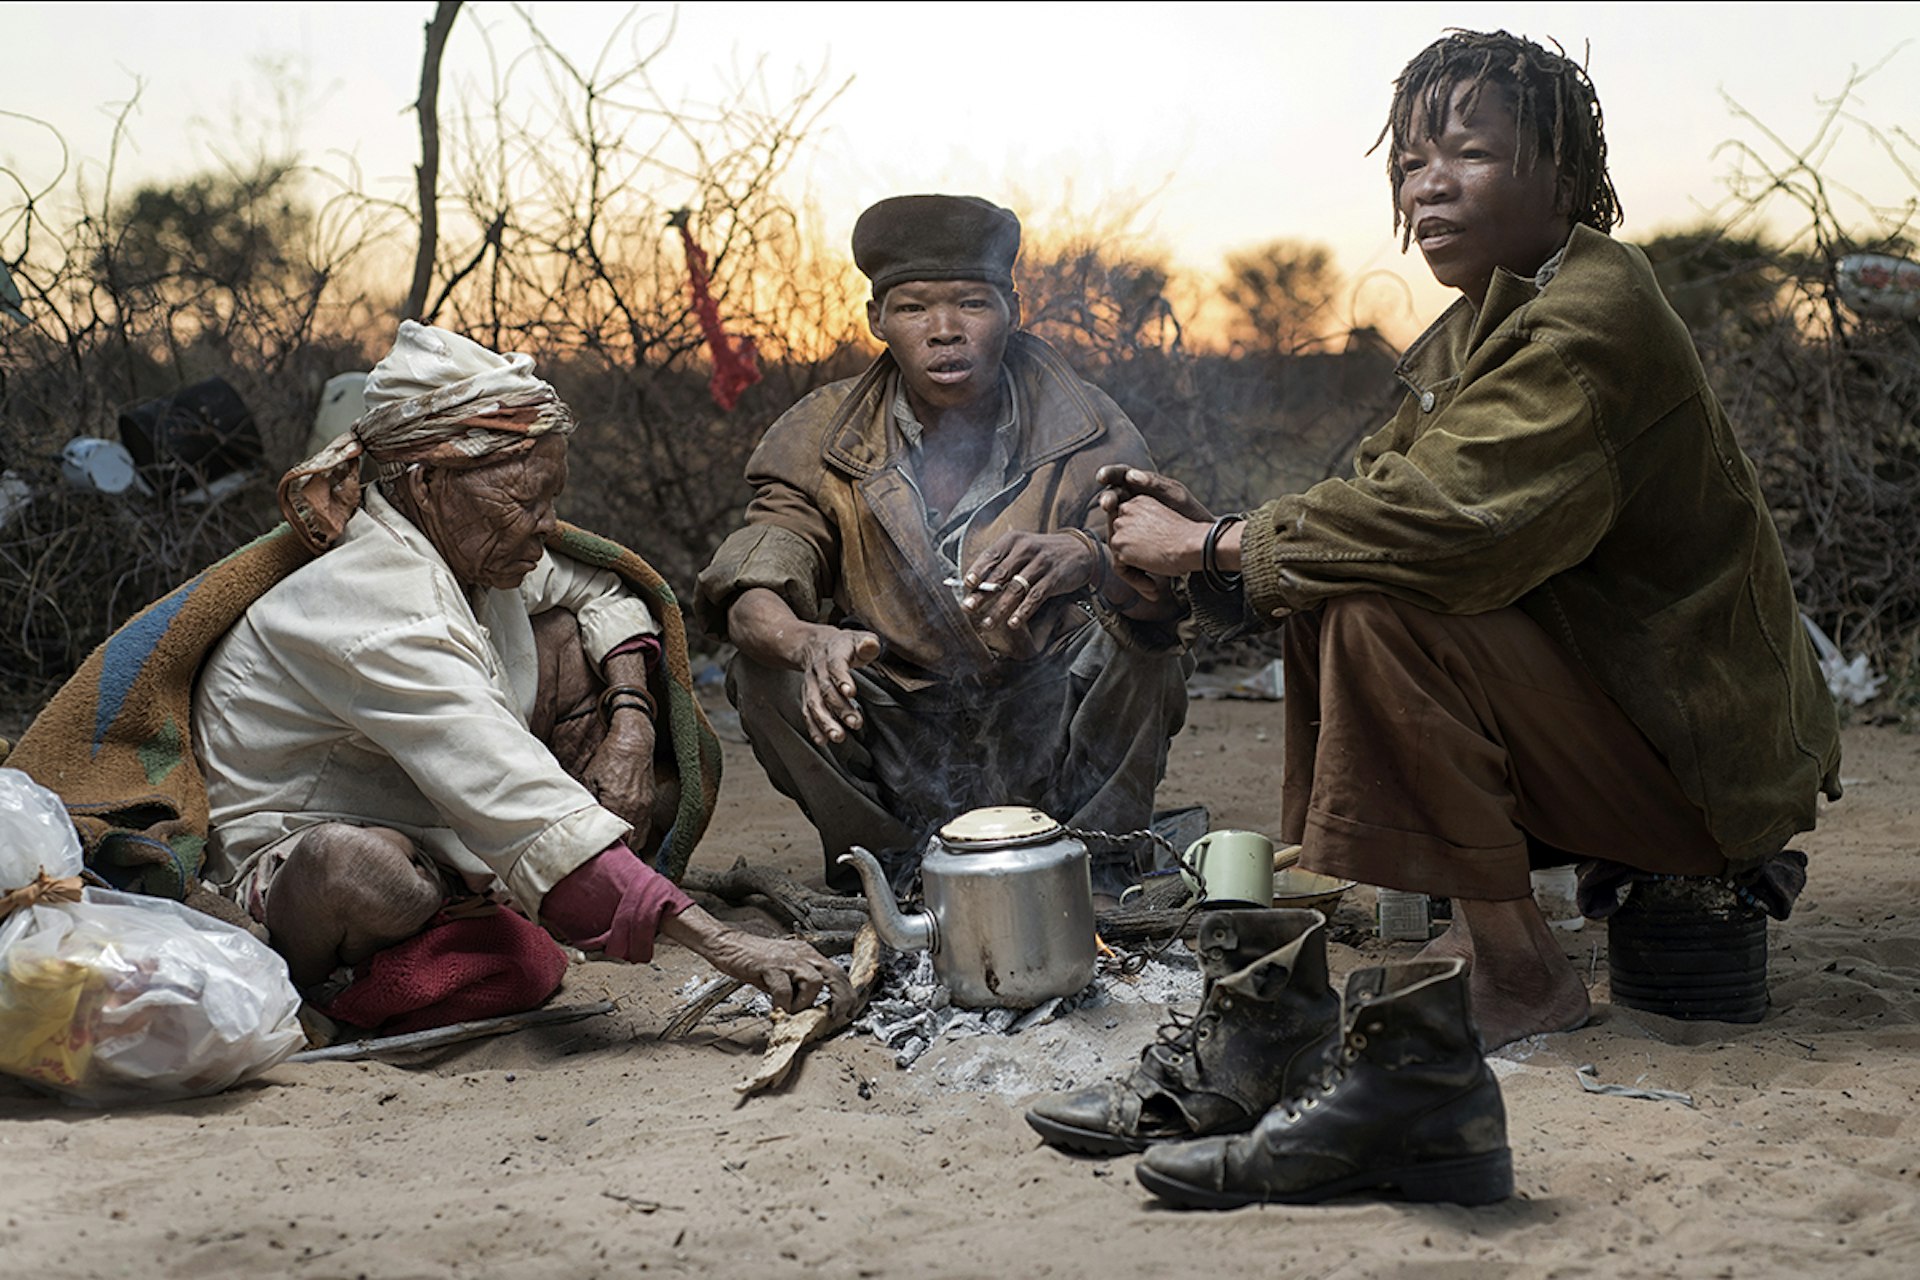 An intimate portrait of life in modern Botswana